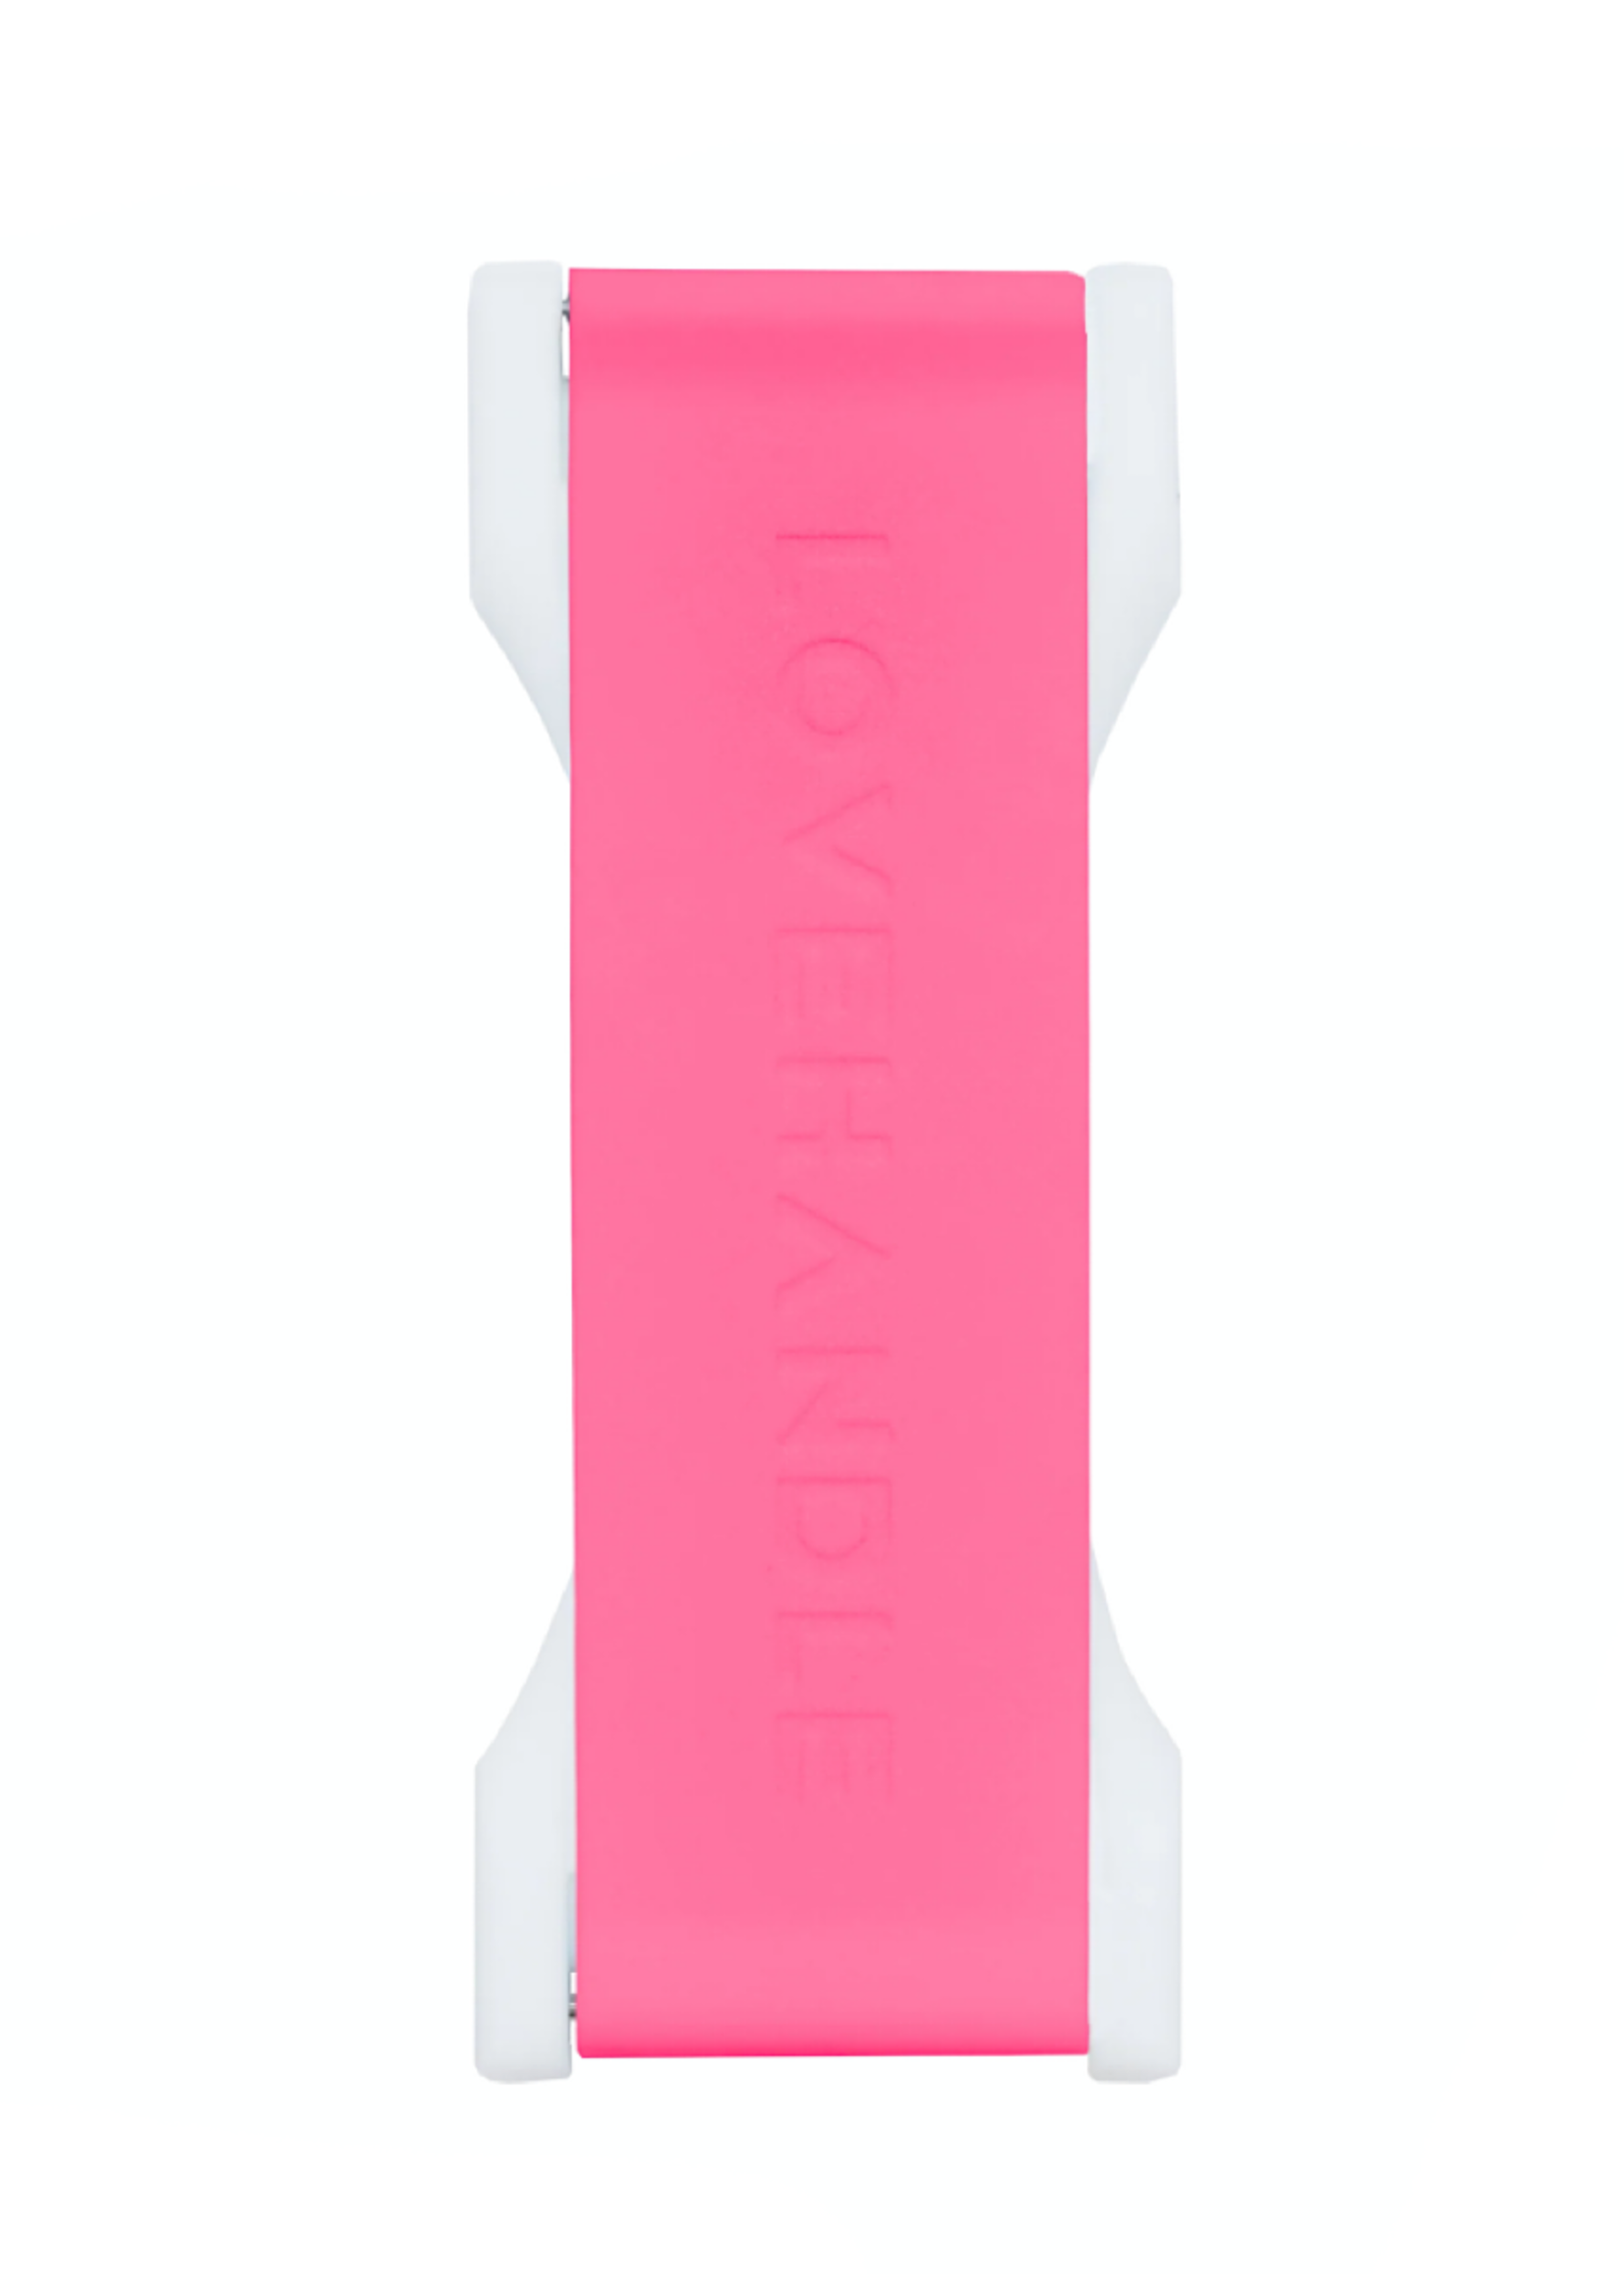 LoveHandle Pro Silicone